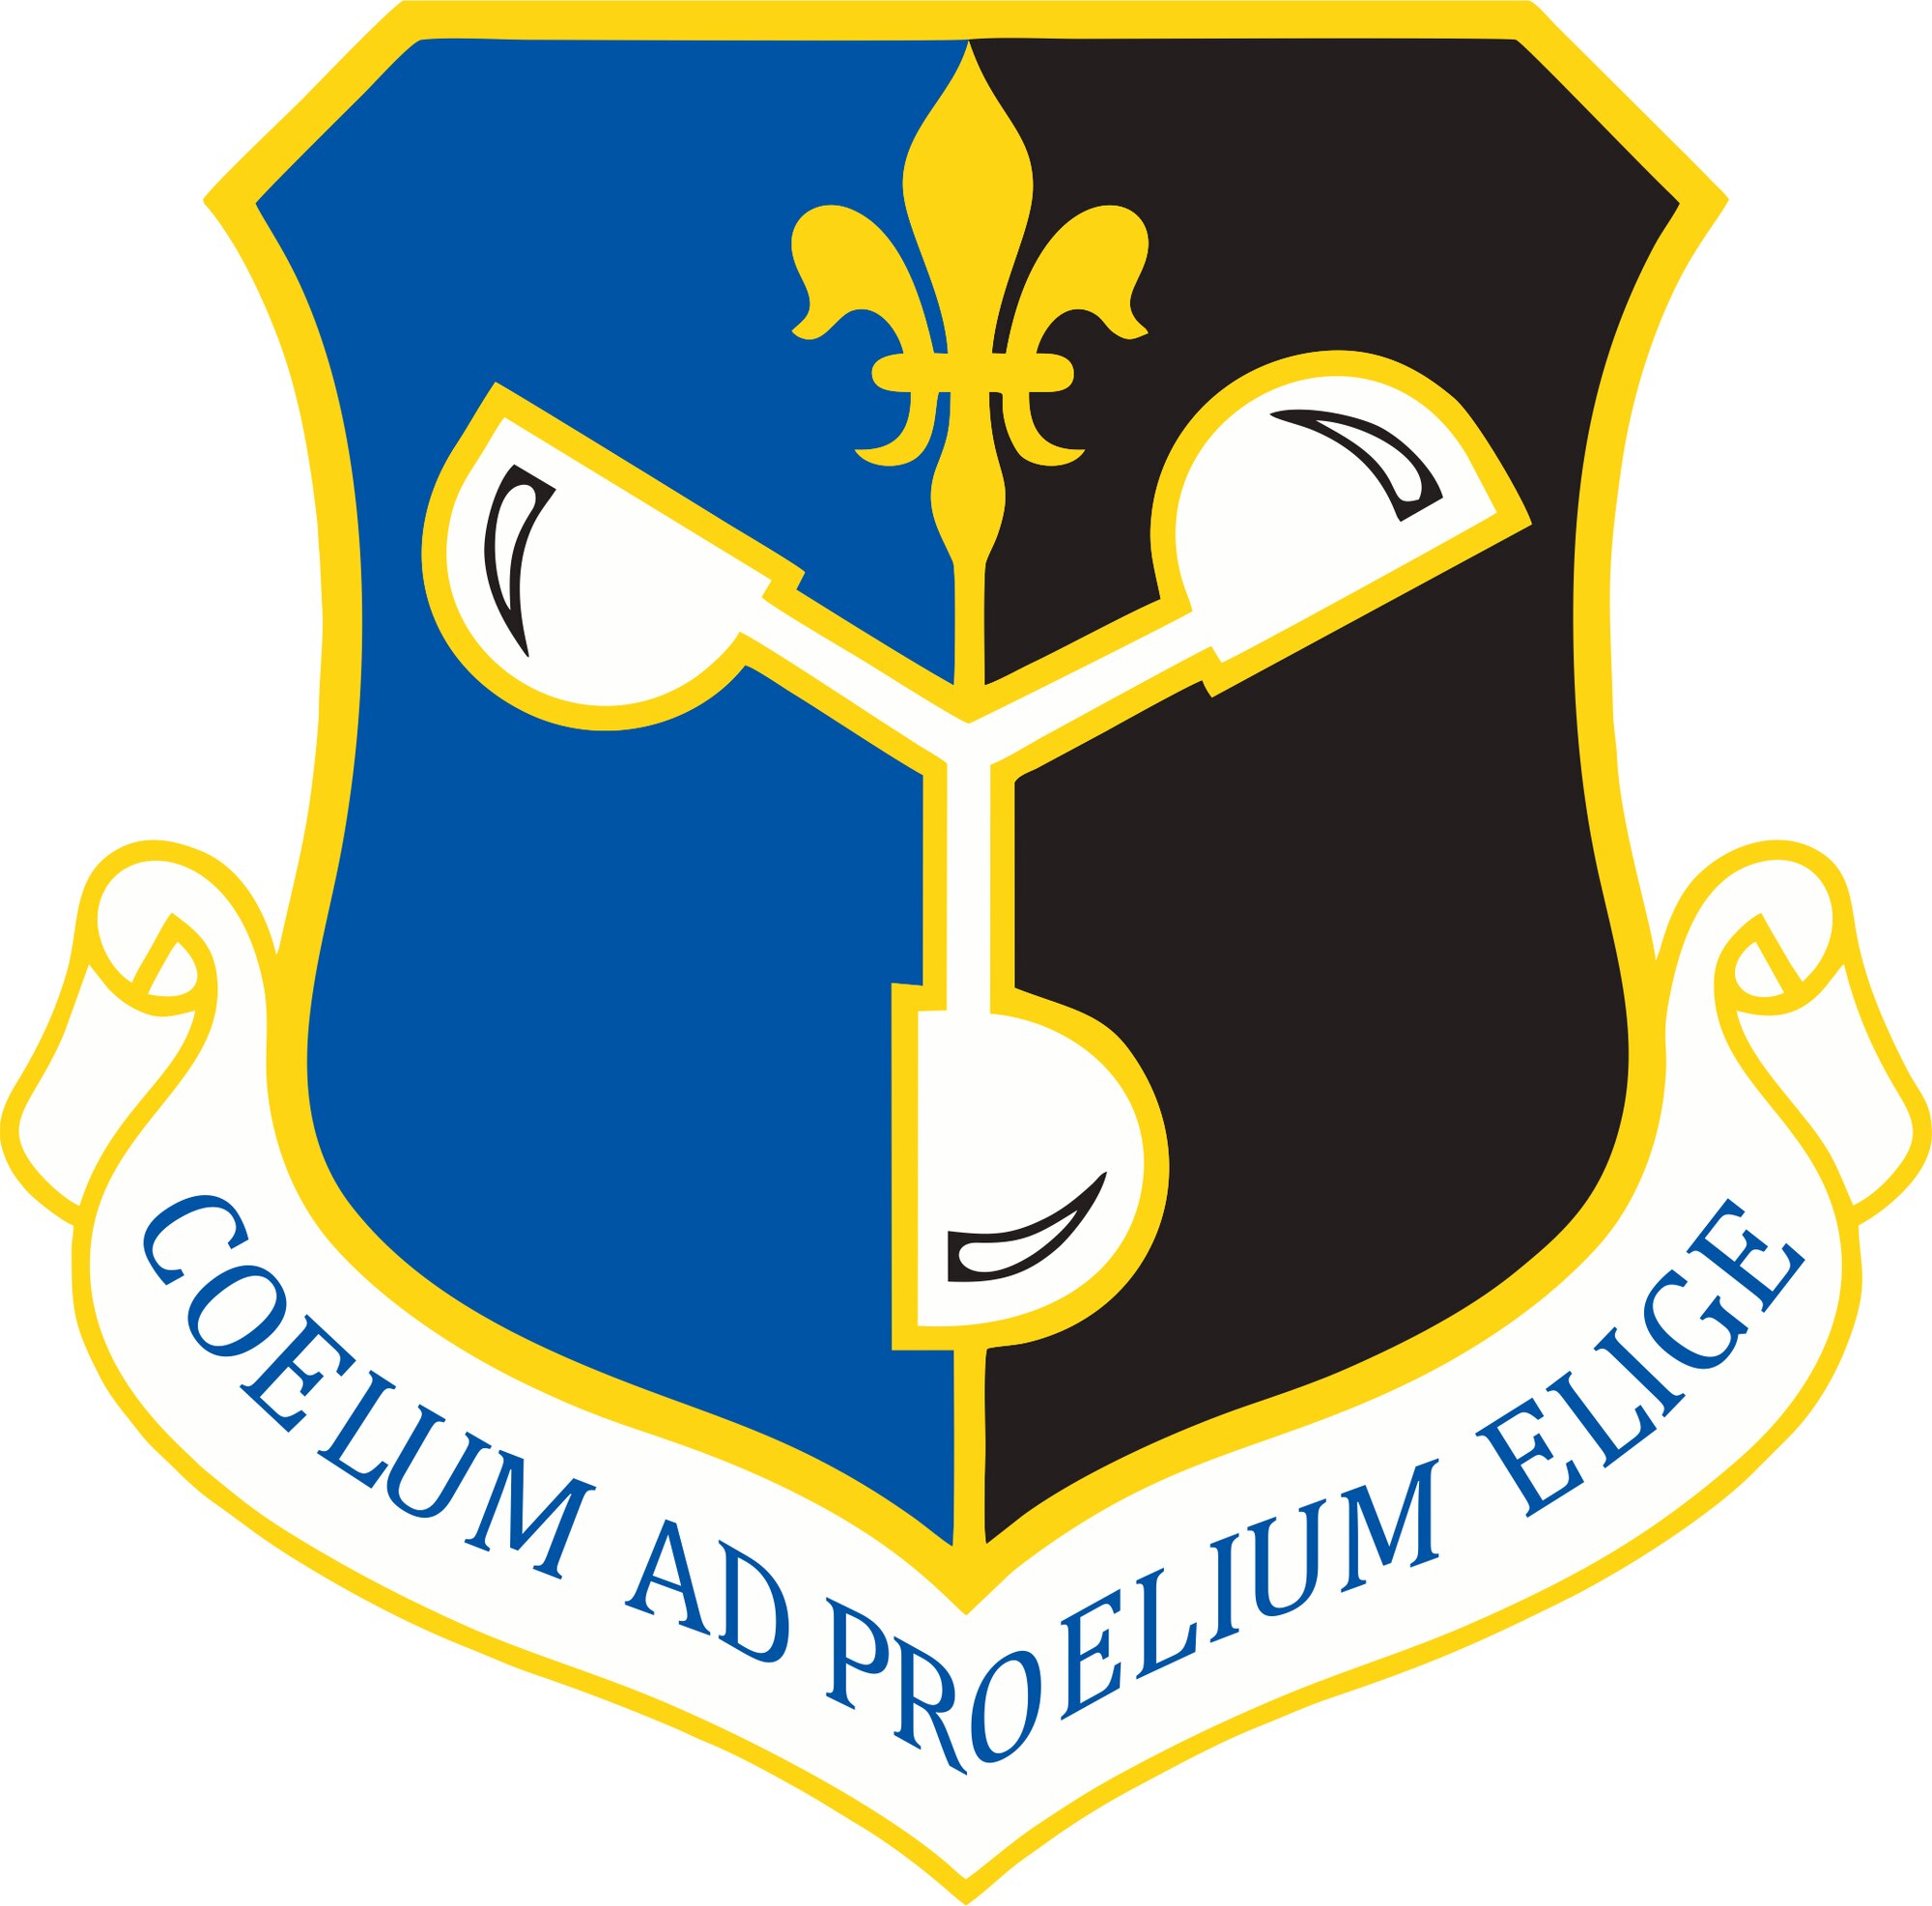 The Air Force Weather Agency will be officially re-designated as the 557th Weather Wing on March 27, 2015. The re-designated unit’s new shield looks the same as AFWA’s, but the verbiage at the bottom now reads, “Coelum Ad Prelium Elige,” which is Latin for, “Choose the Weather for Battle.”